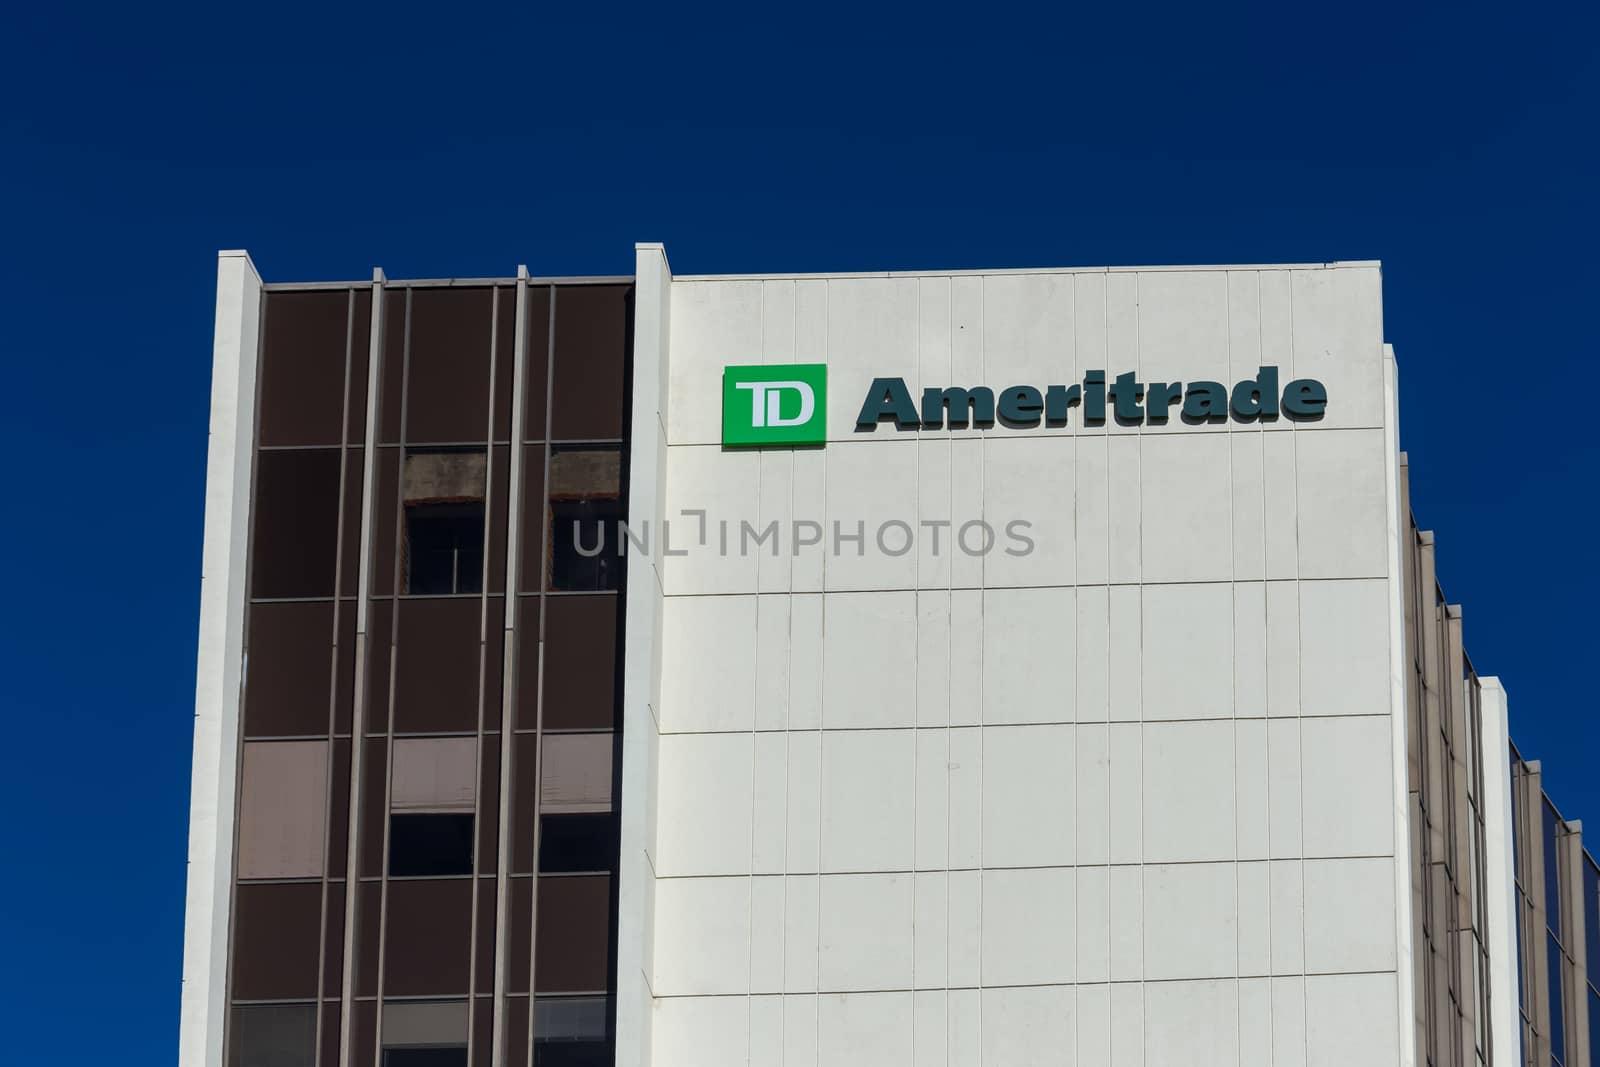 LOS ANGELES, CA/USA - November 11, 2015: TD Ameritrade Building and logo. TD Ameritrade is an American online broker of financial products.